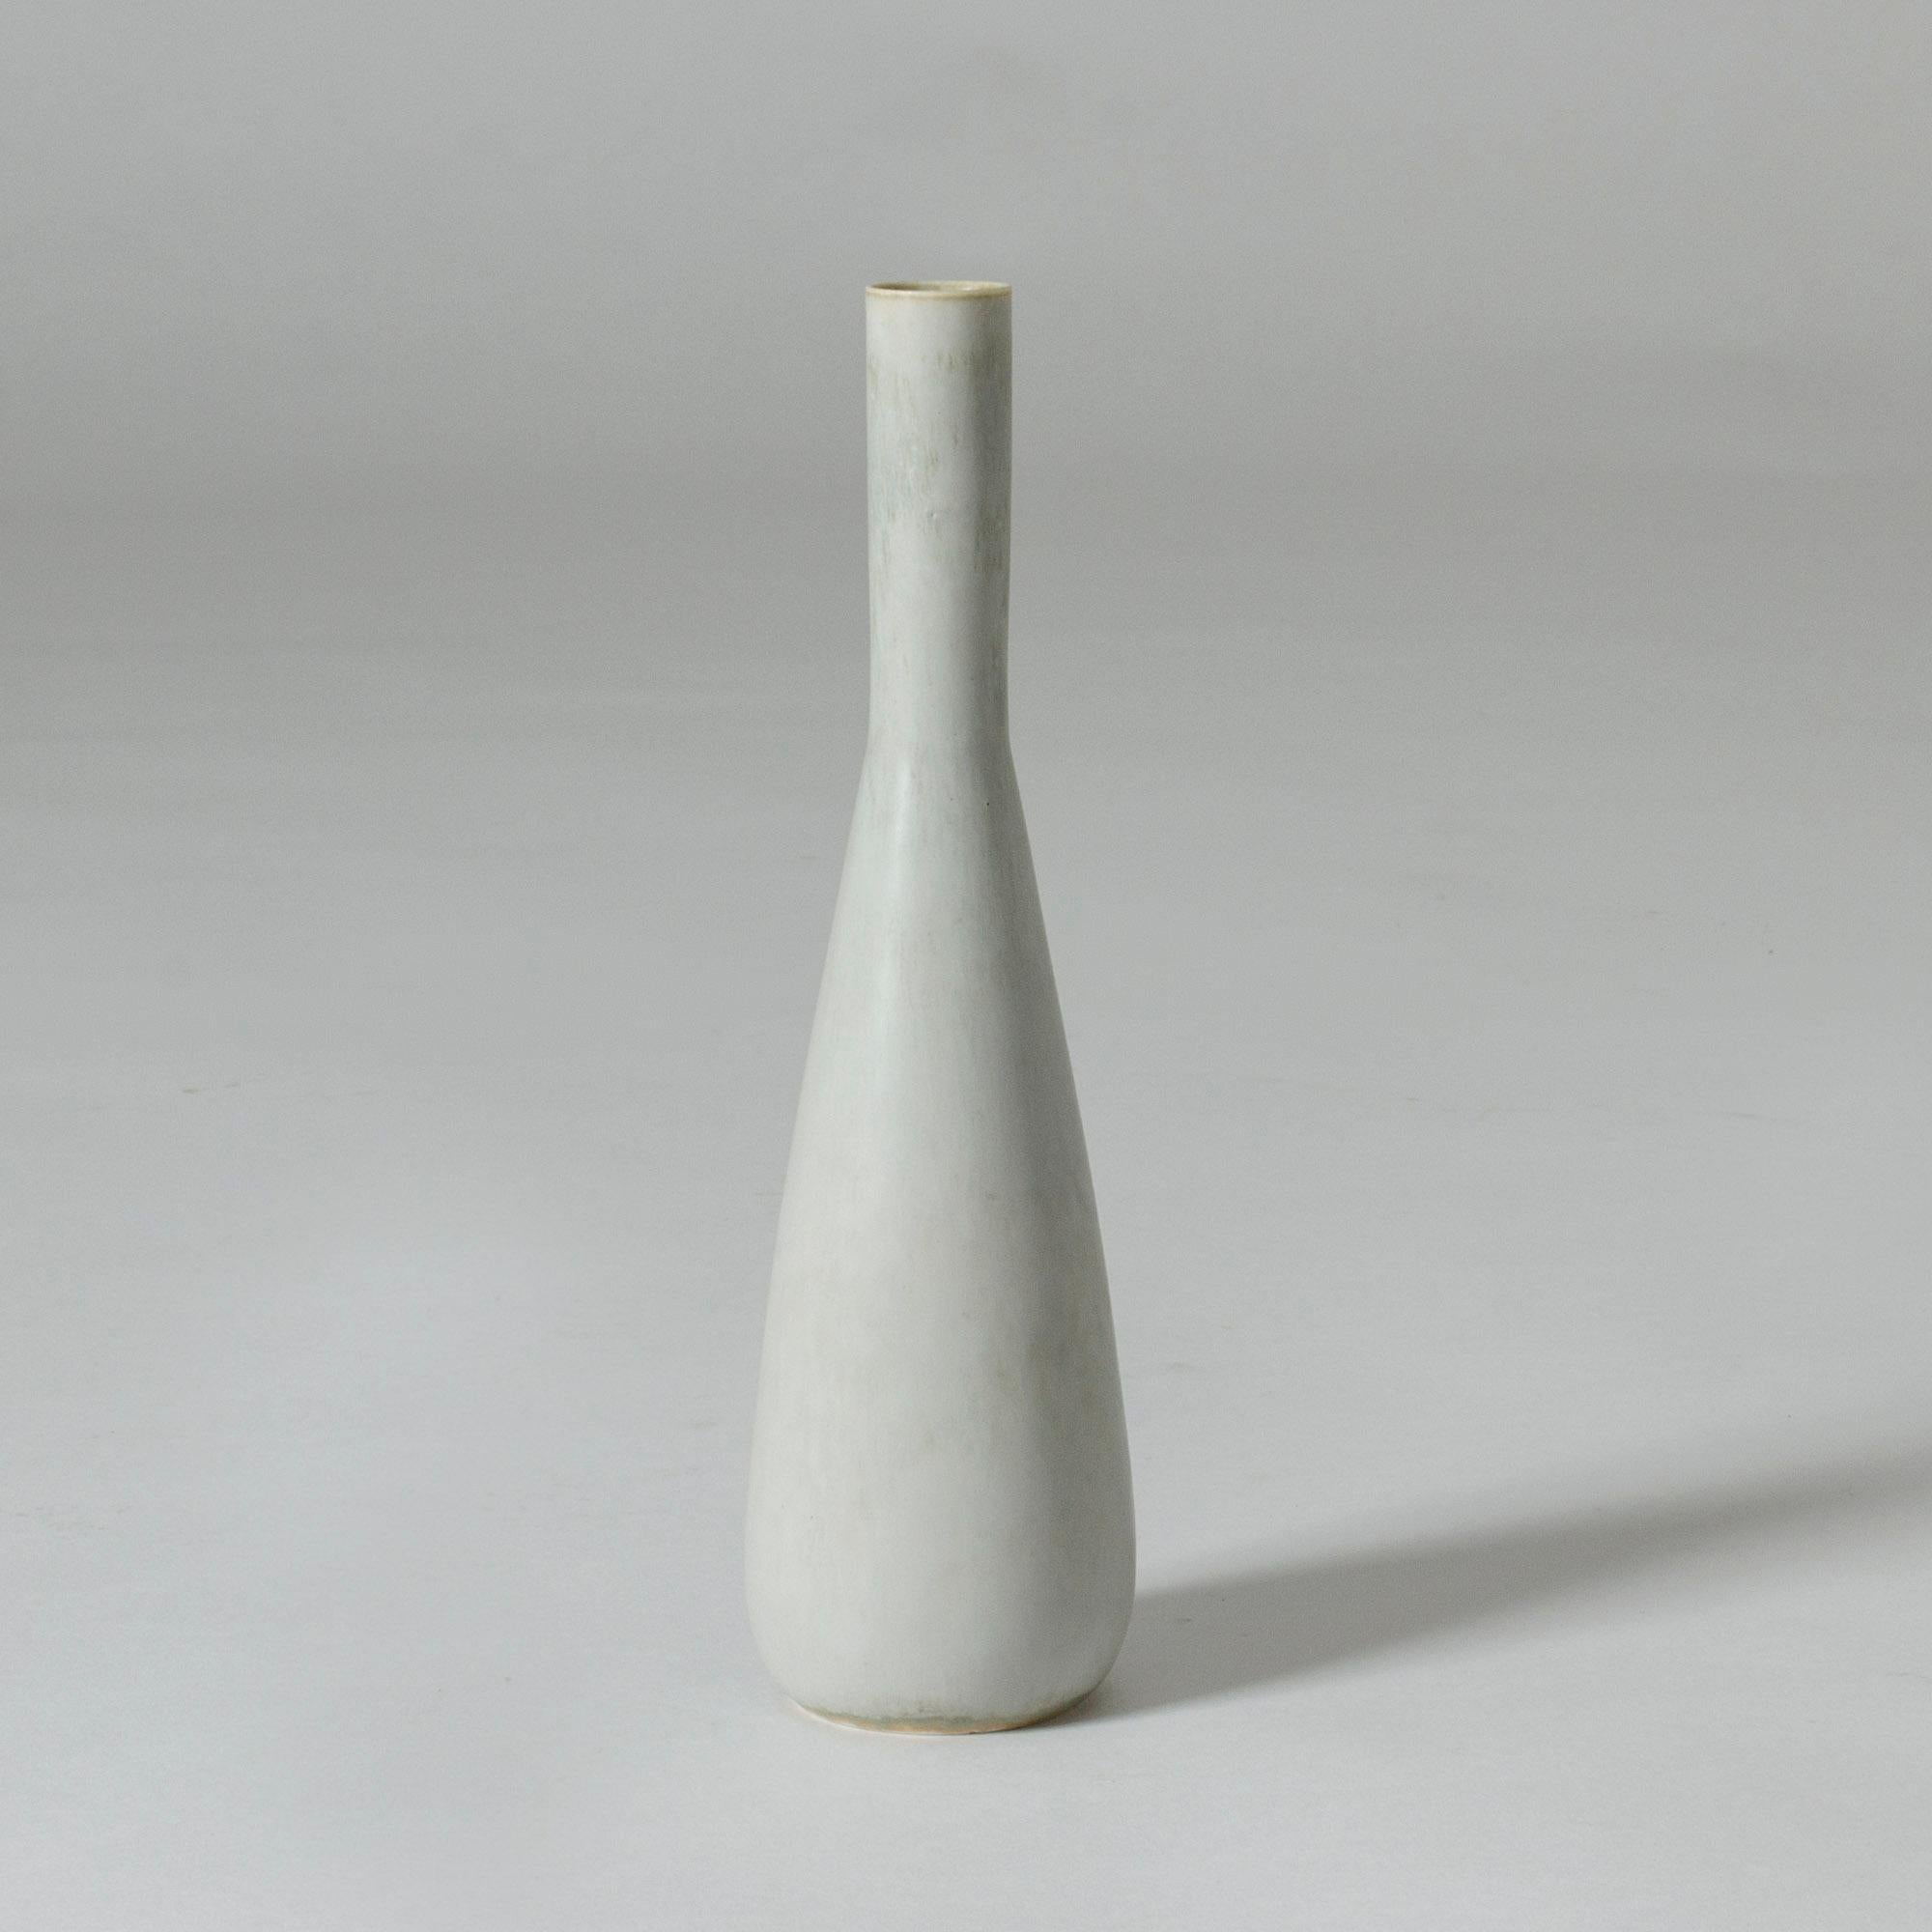 Elegant unique stoneware vase by Carl-Harry Stålhane. Slender shape and a pale, grey glaze.

Carl-Harry Stålhane was one of the stars among Swedish ceramic artists during the 1950s, 1960s and 1970s, whose designs are just as highly regarded and